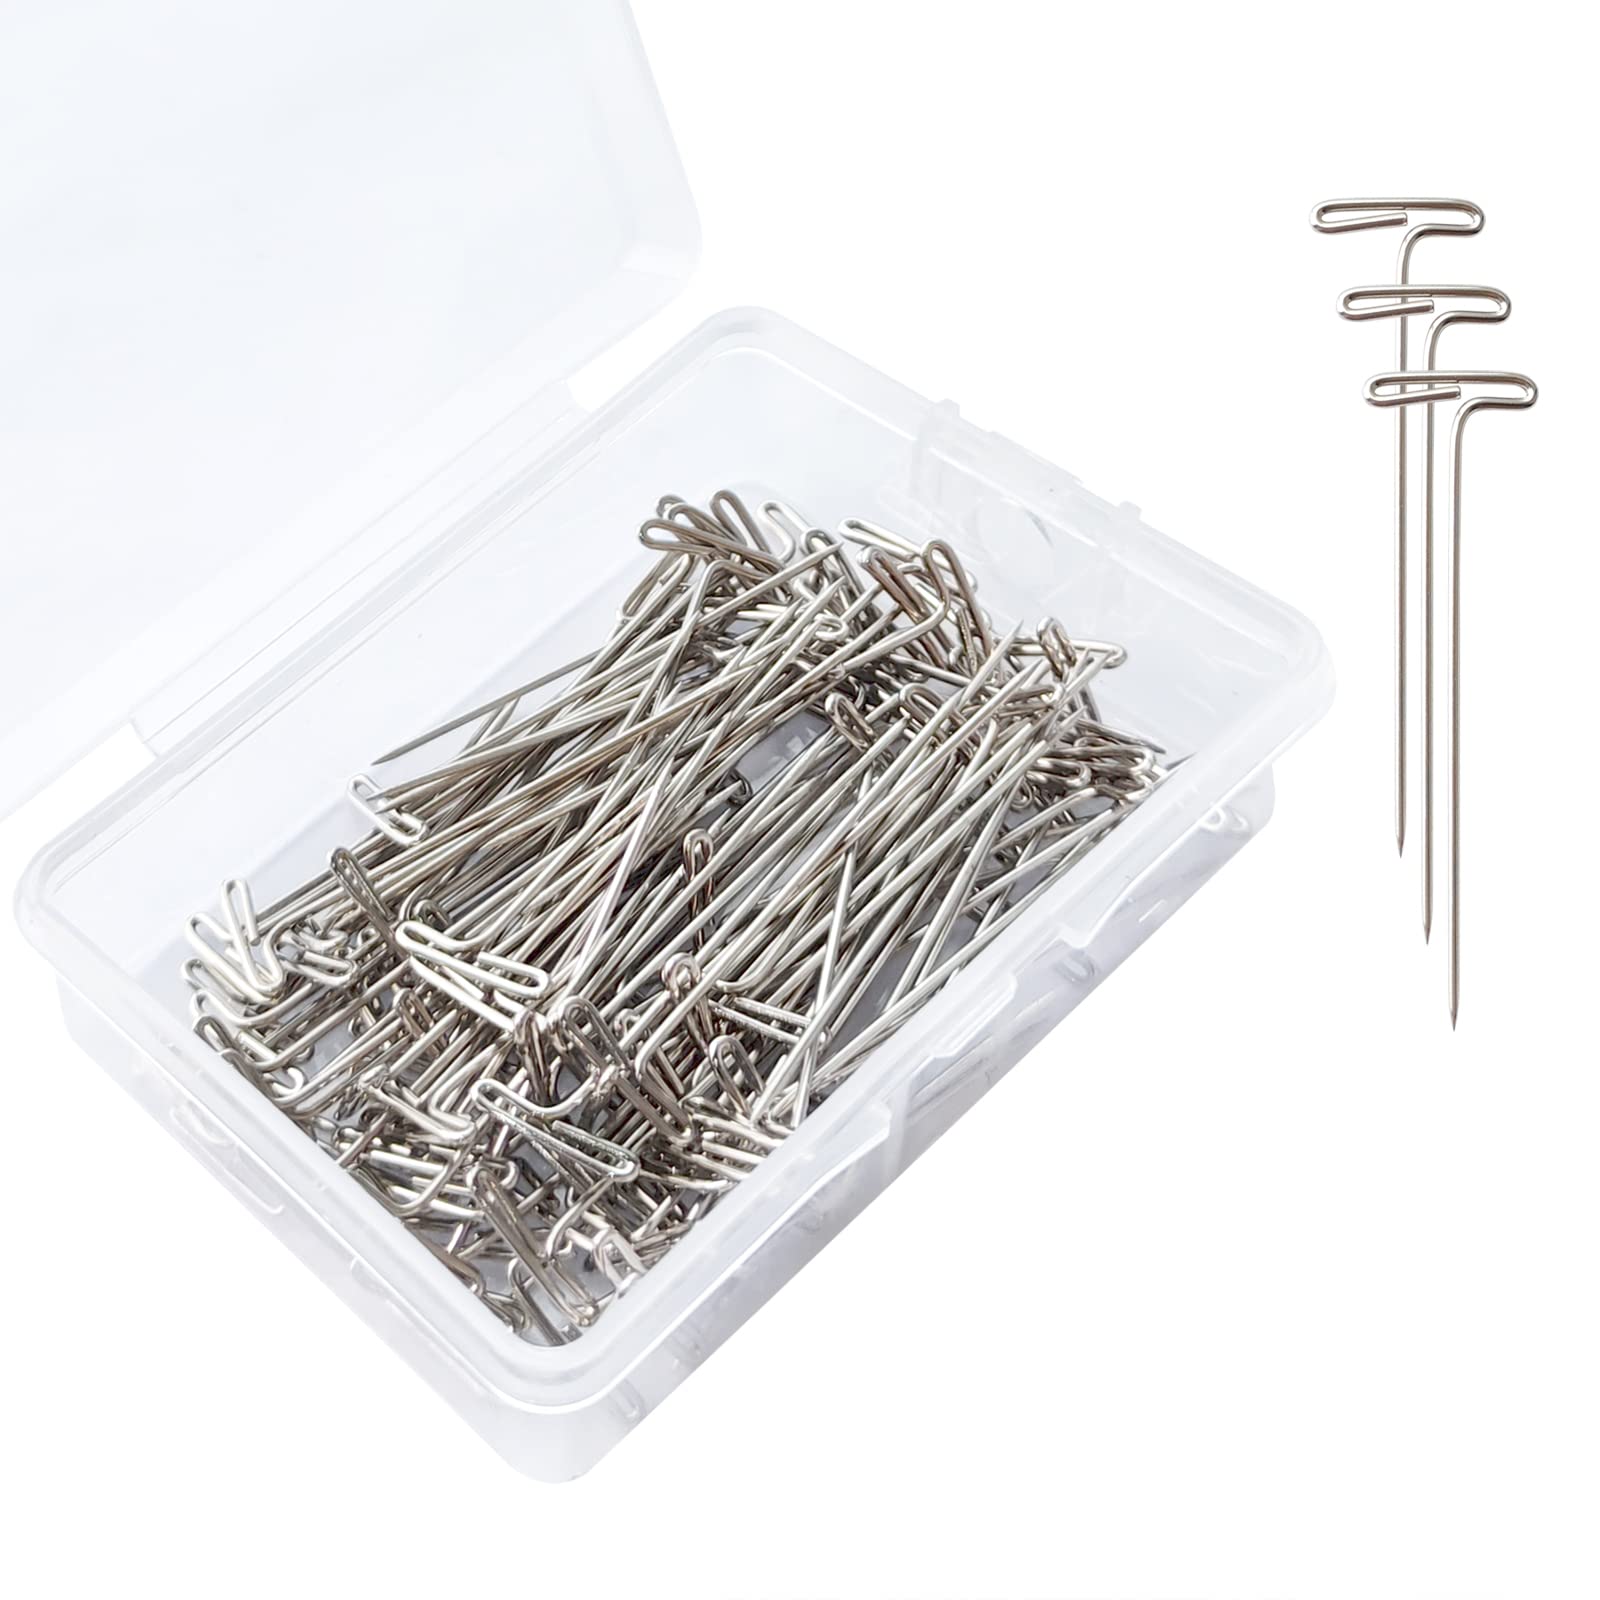 T Pins for Wig on Foam Head Style T Pin Needle Hair Salon Styling Tools